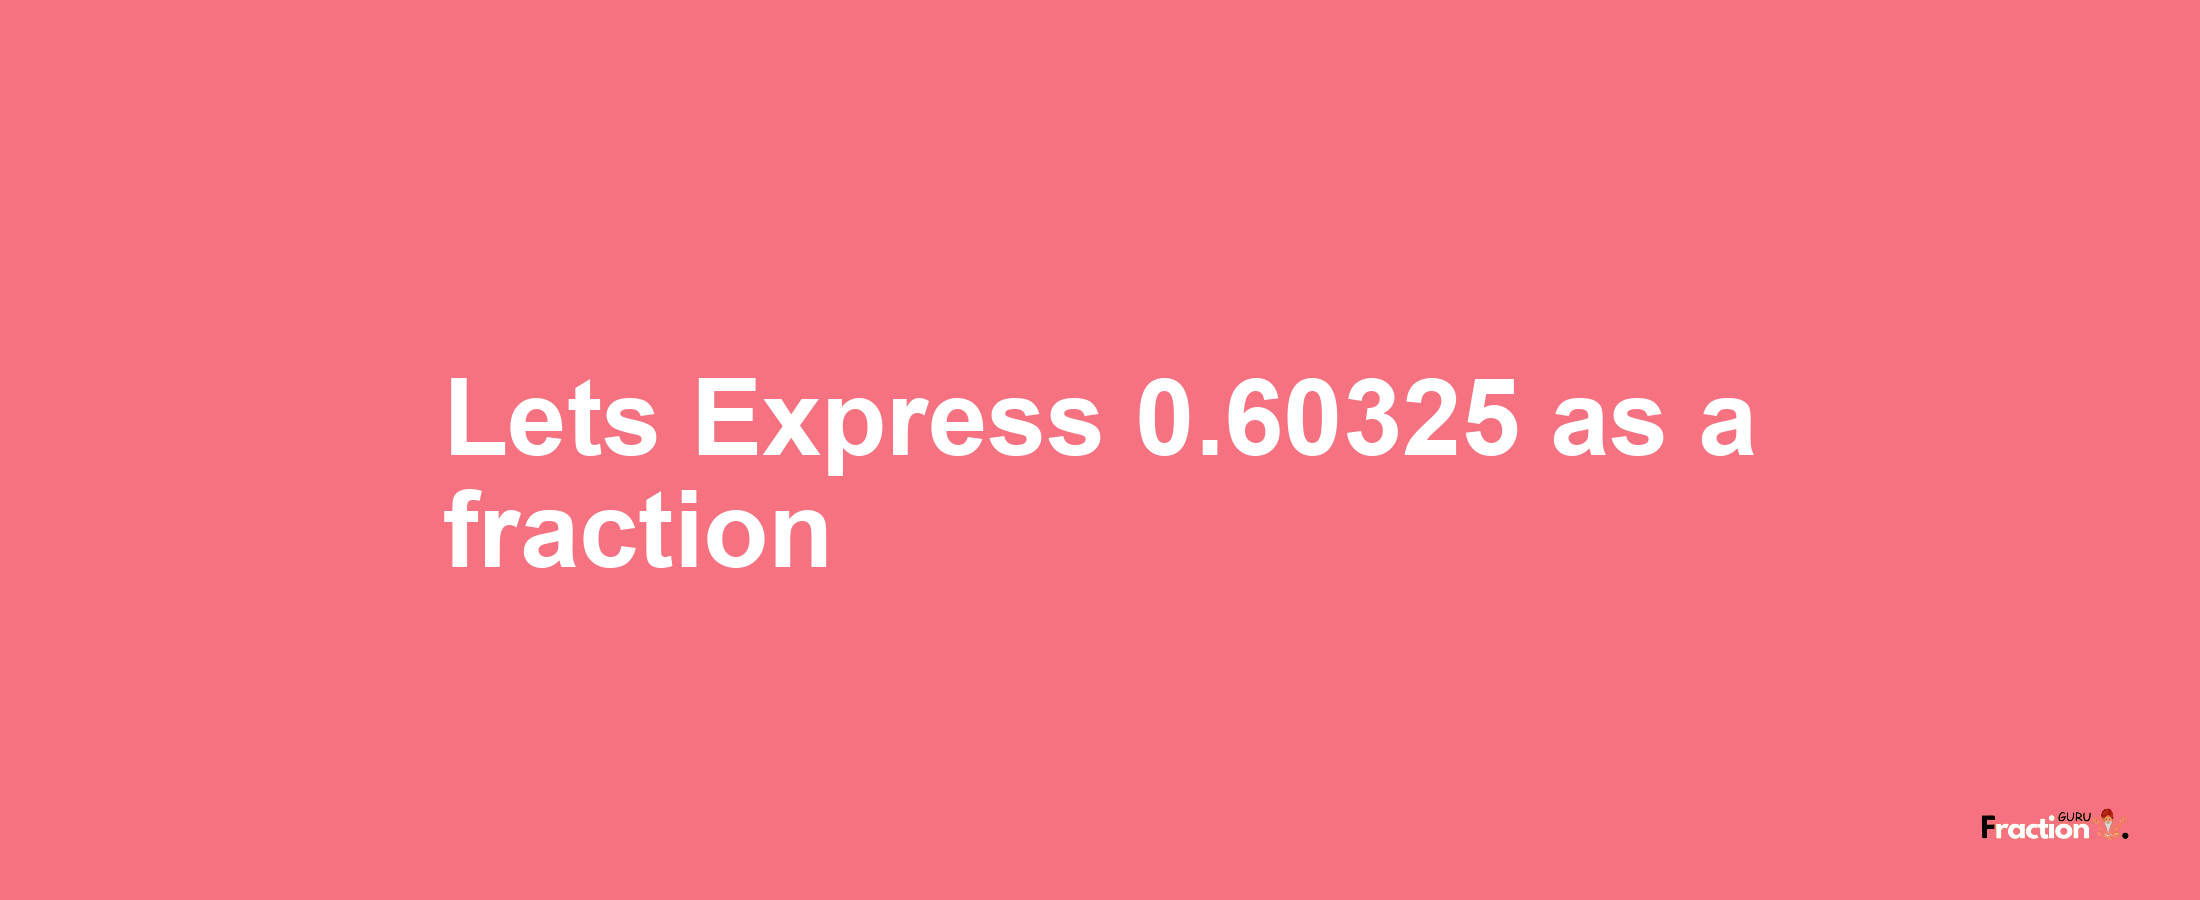 Lets Express 0.60325 as afraction